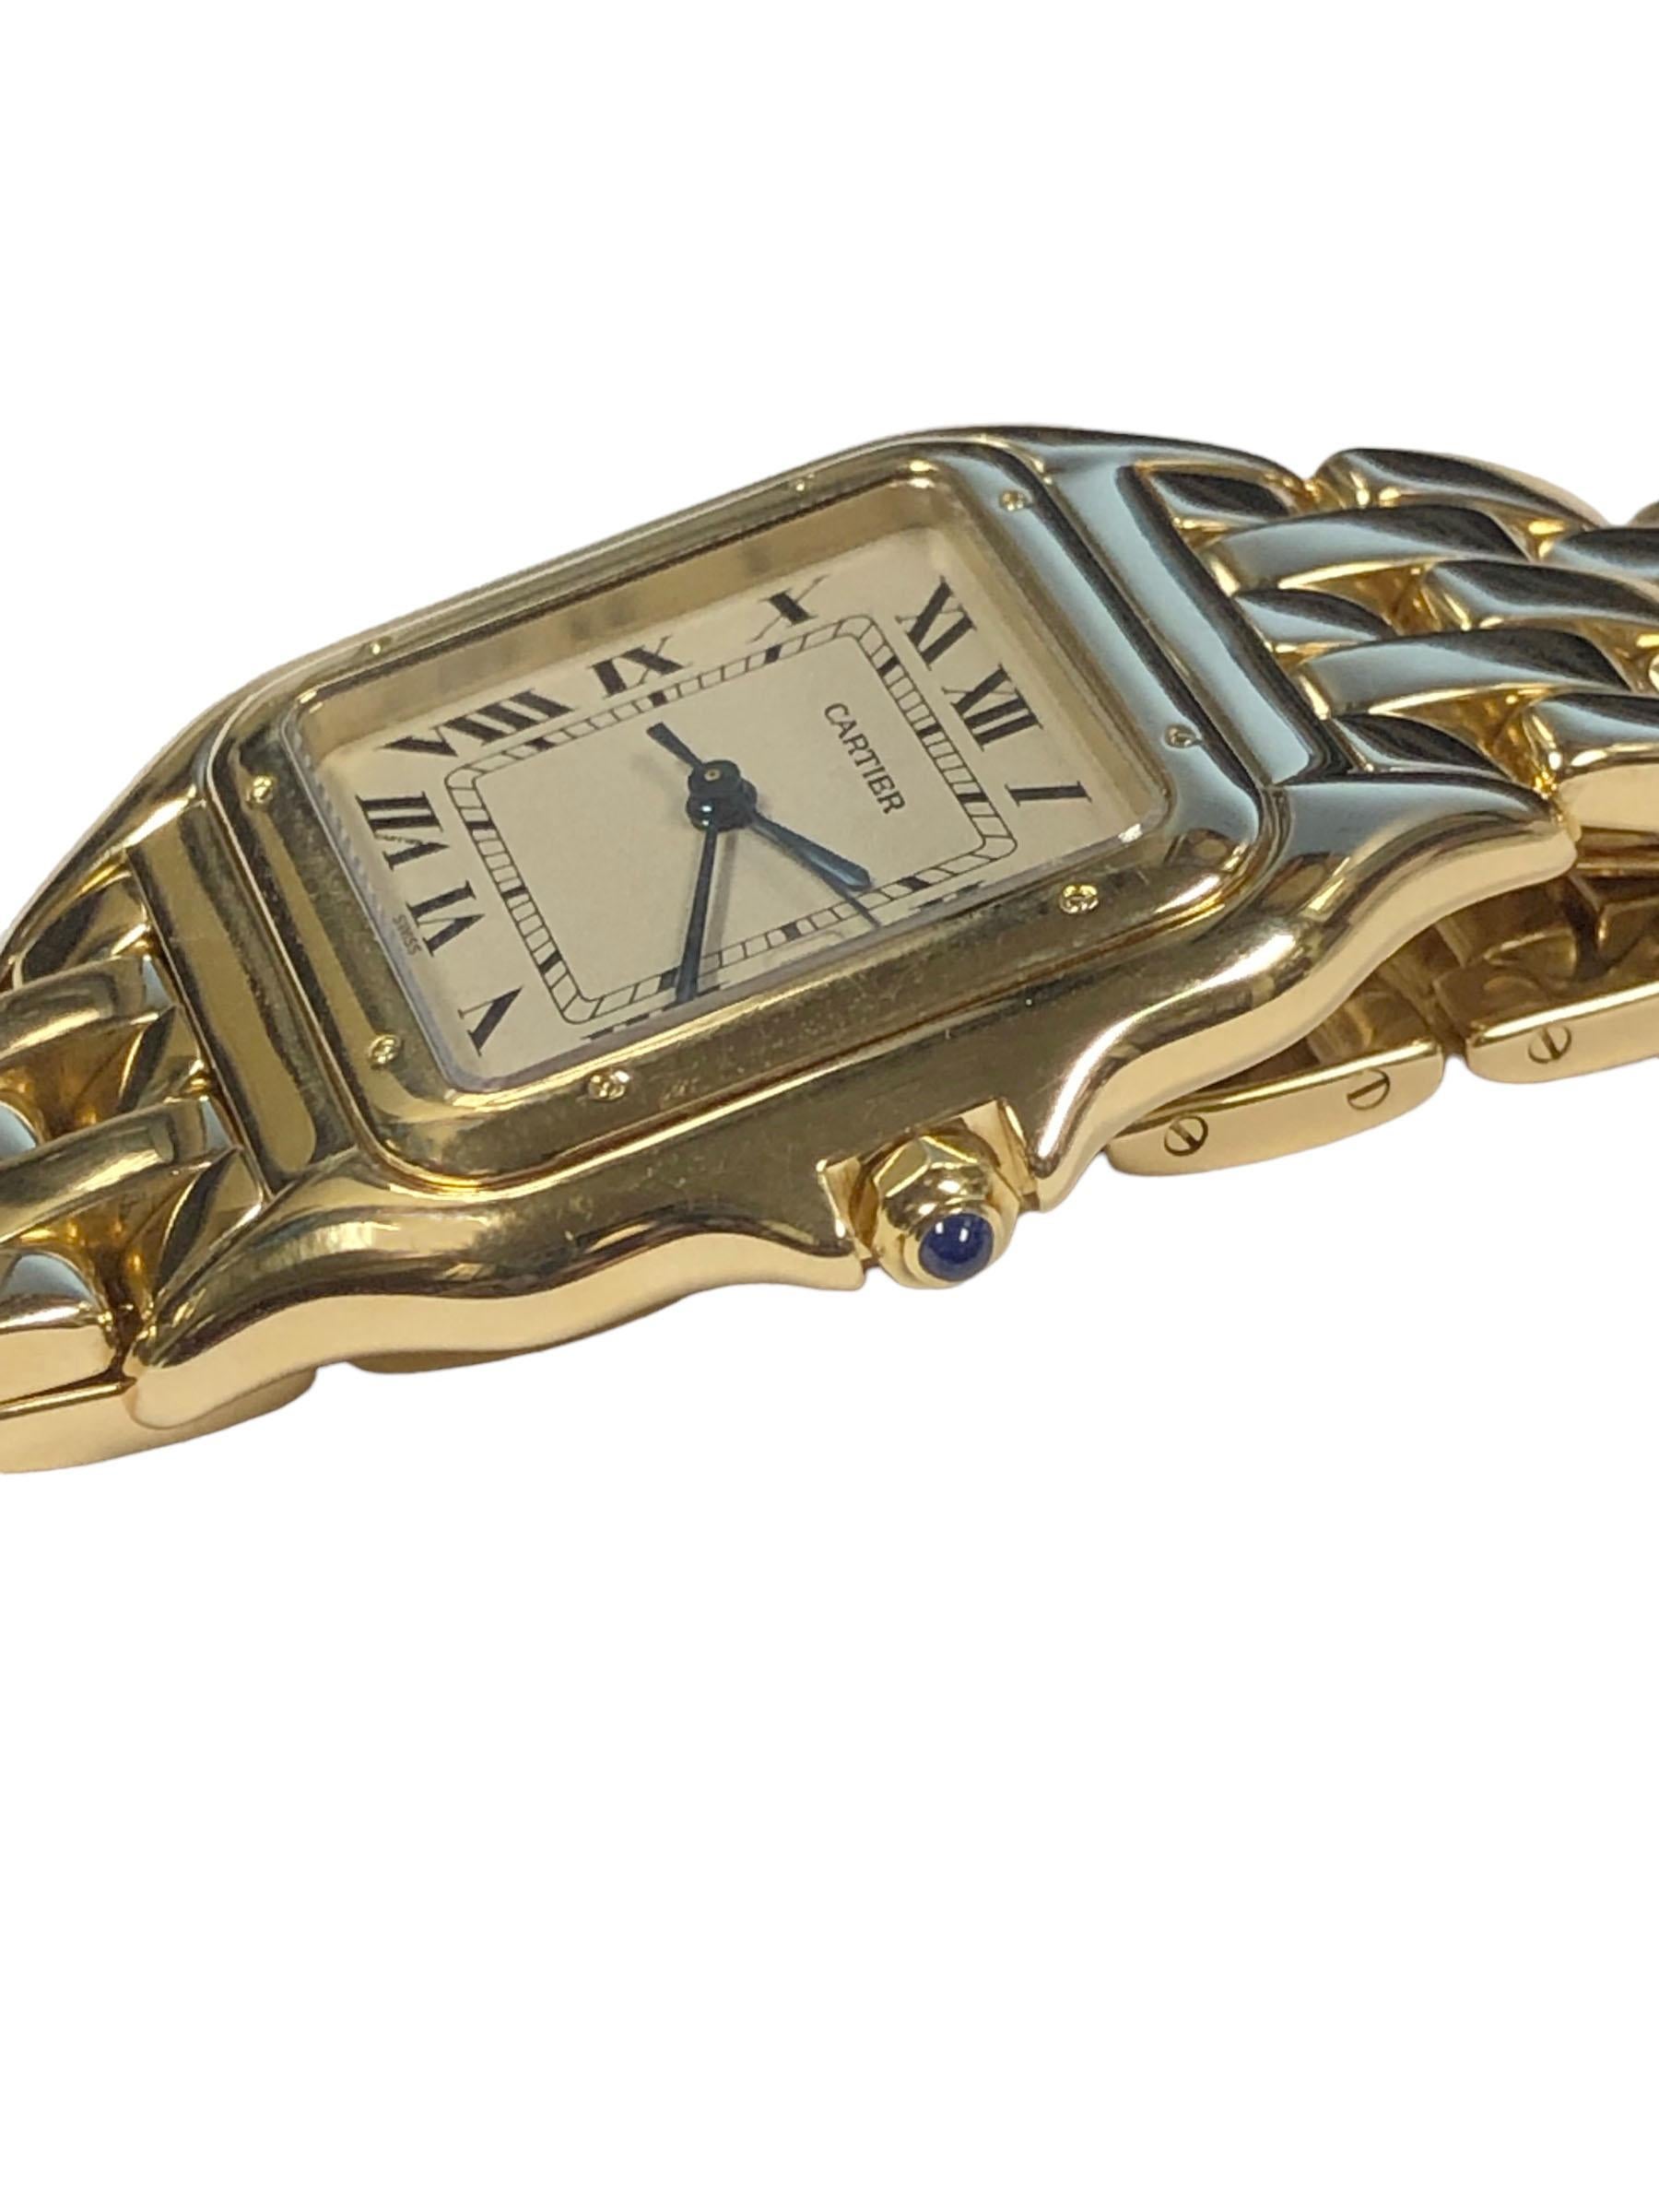 Circa 2000 Cartier Panther collection Wrist Watch, 29 x 29 M.M. 18k Yellow Gold 3 piece case, Quartz movement, Sapphire Crown, off white dial with Black Roman numerals, calendar window at the 3 position and a sweep seconds hand. 5/8 inch wide